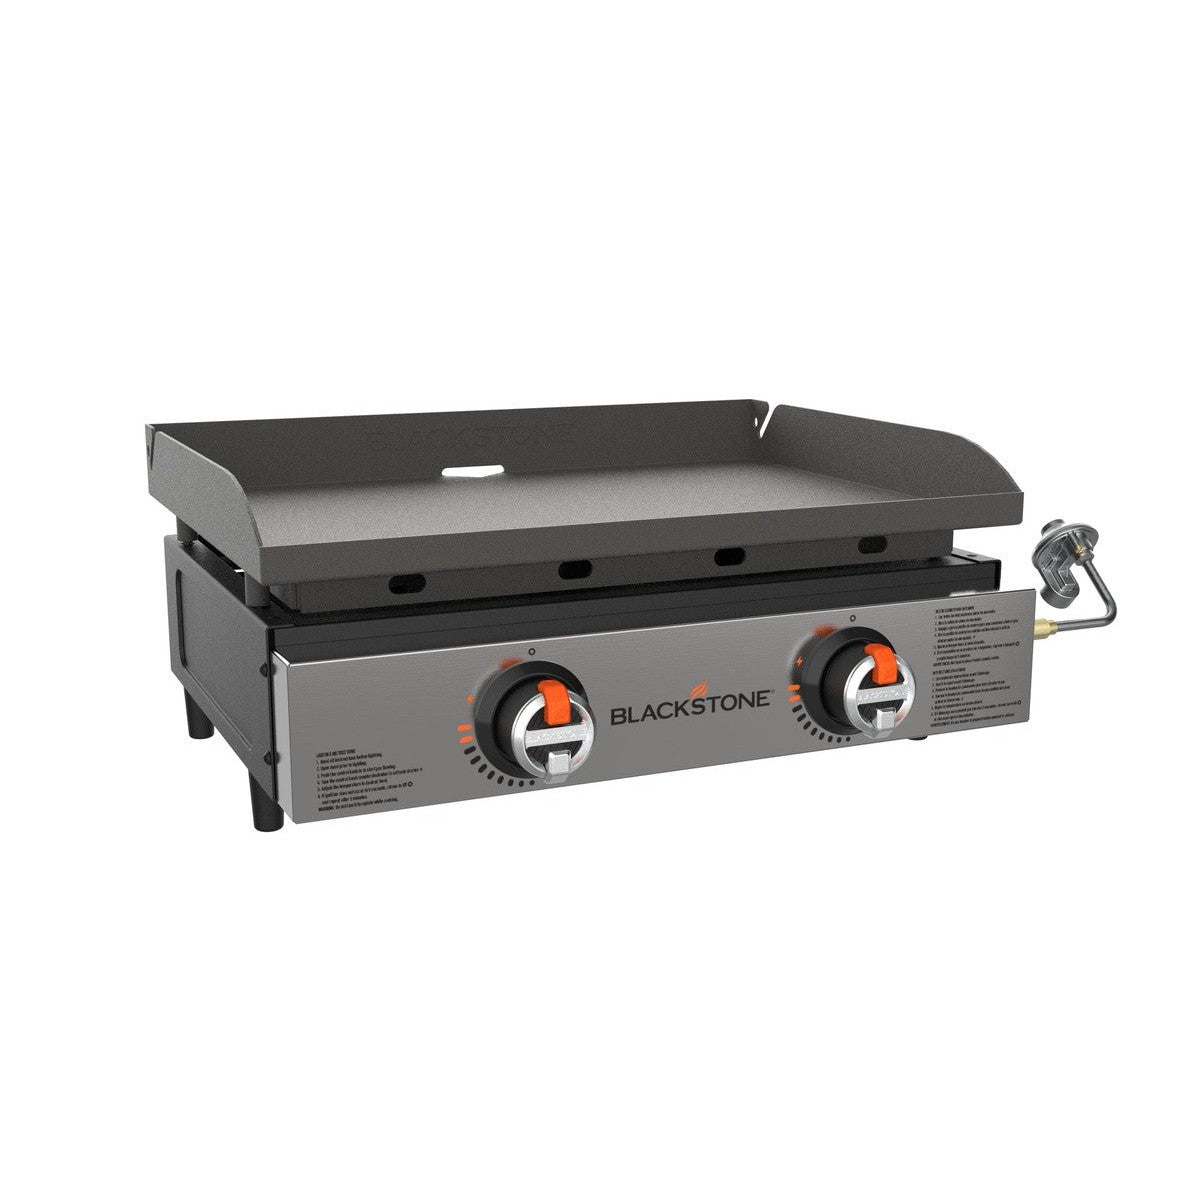 Blackstone Truck Freight - Not Qualified for Free Shipping Blackstone Original 22" Omnivore Stainless Front Panel Tabletop Griddle #2205